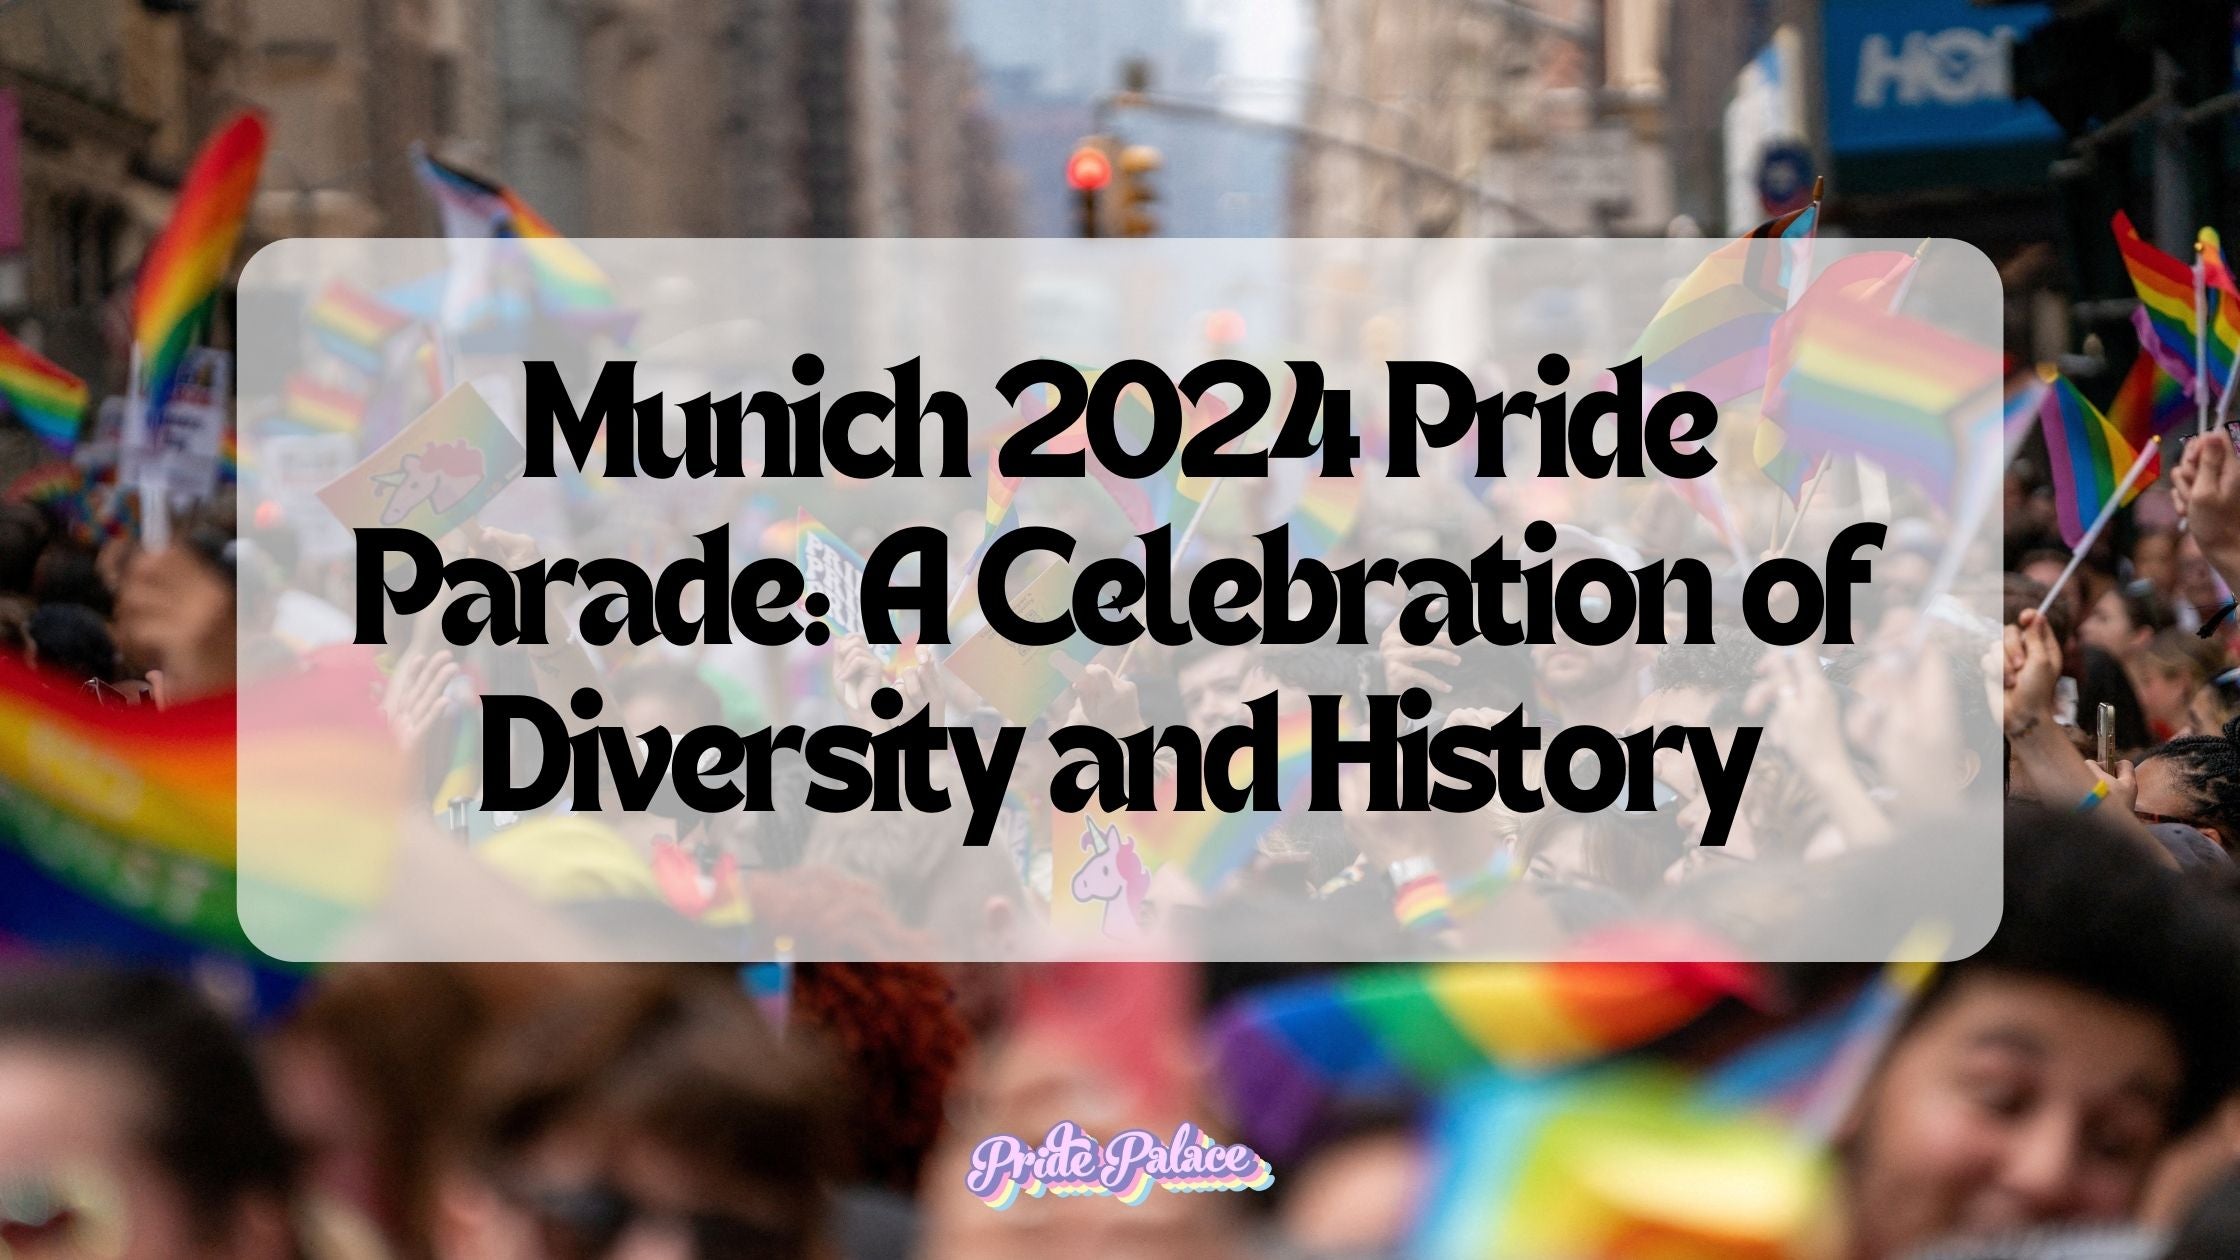 Munich 2024 Pride Parade: A Celebration of Diversity and History